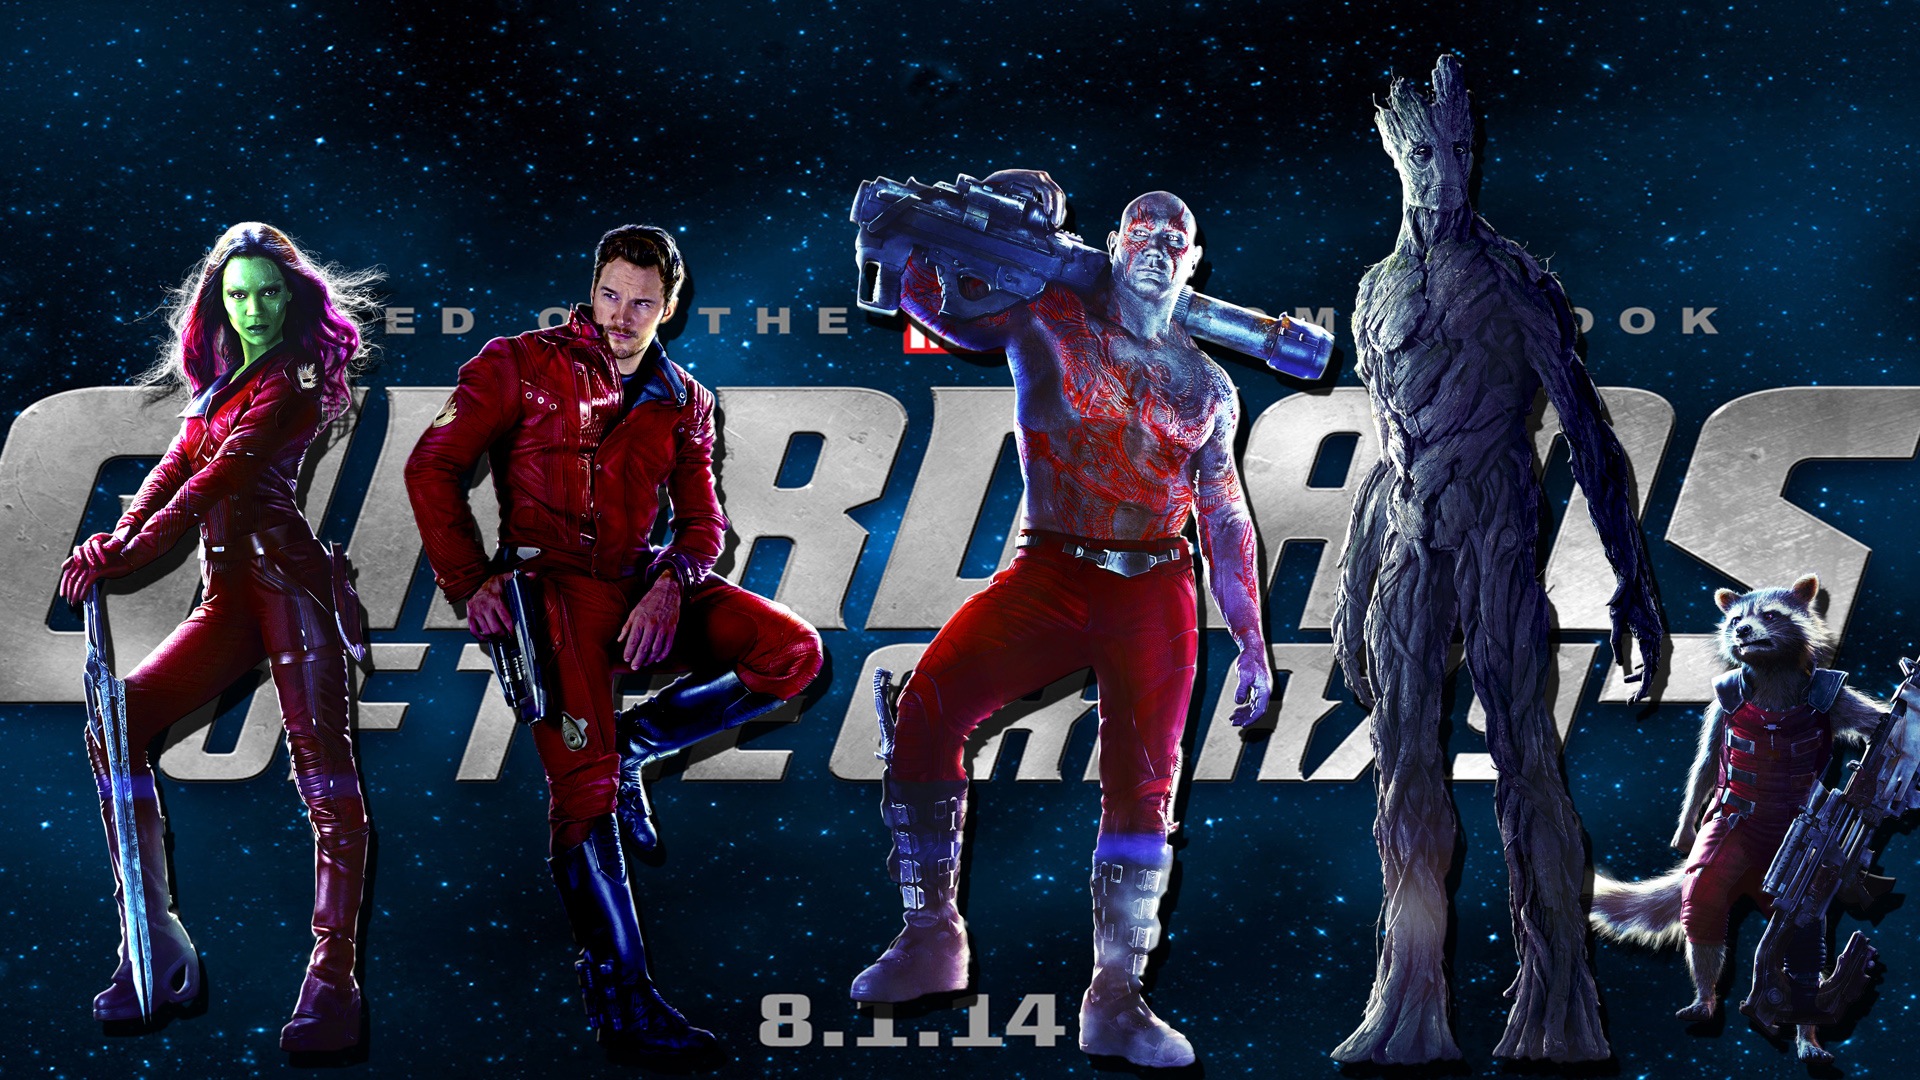 Guardians of the Galaxy 2014 HD movie wallpapers #3 - 1920x1080